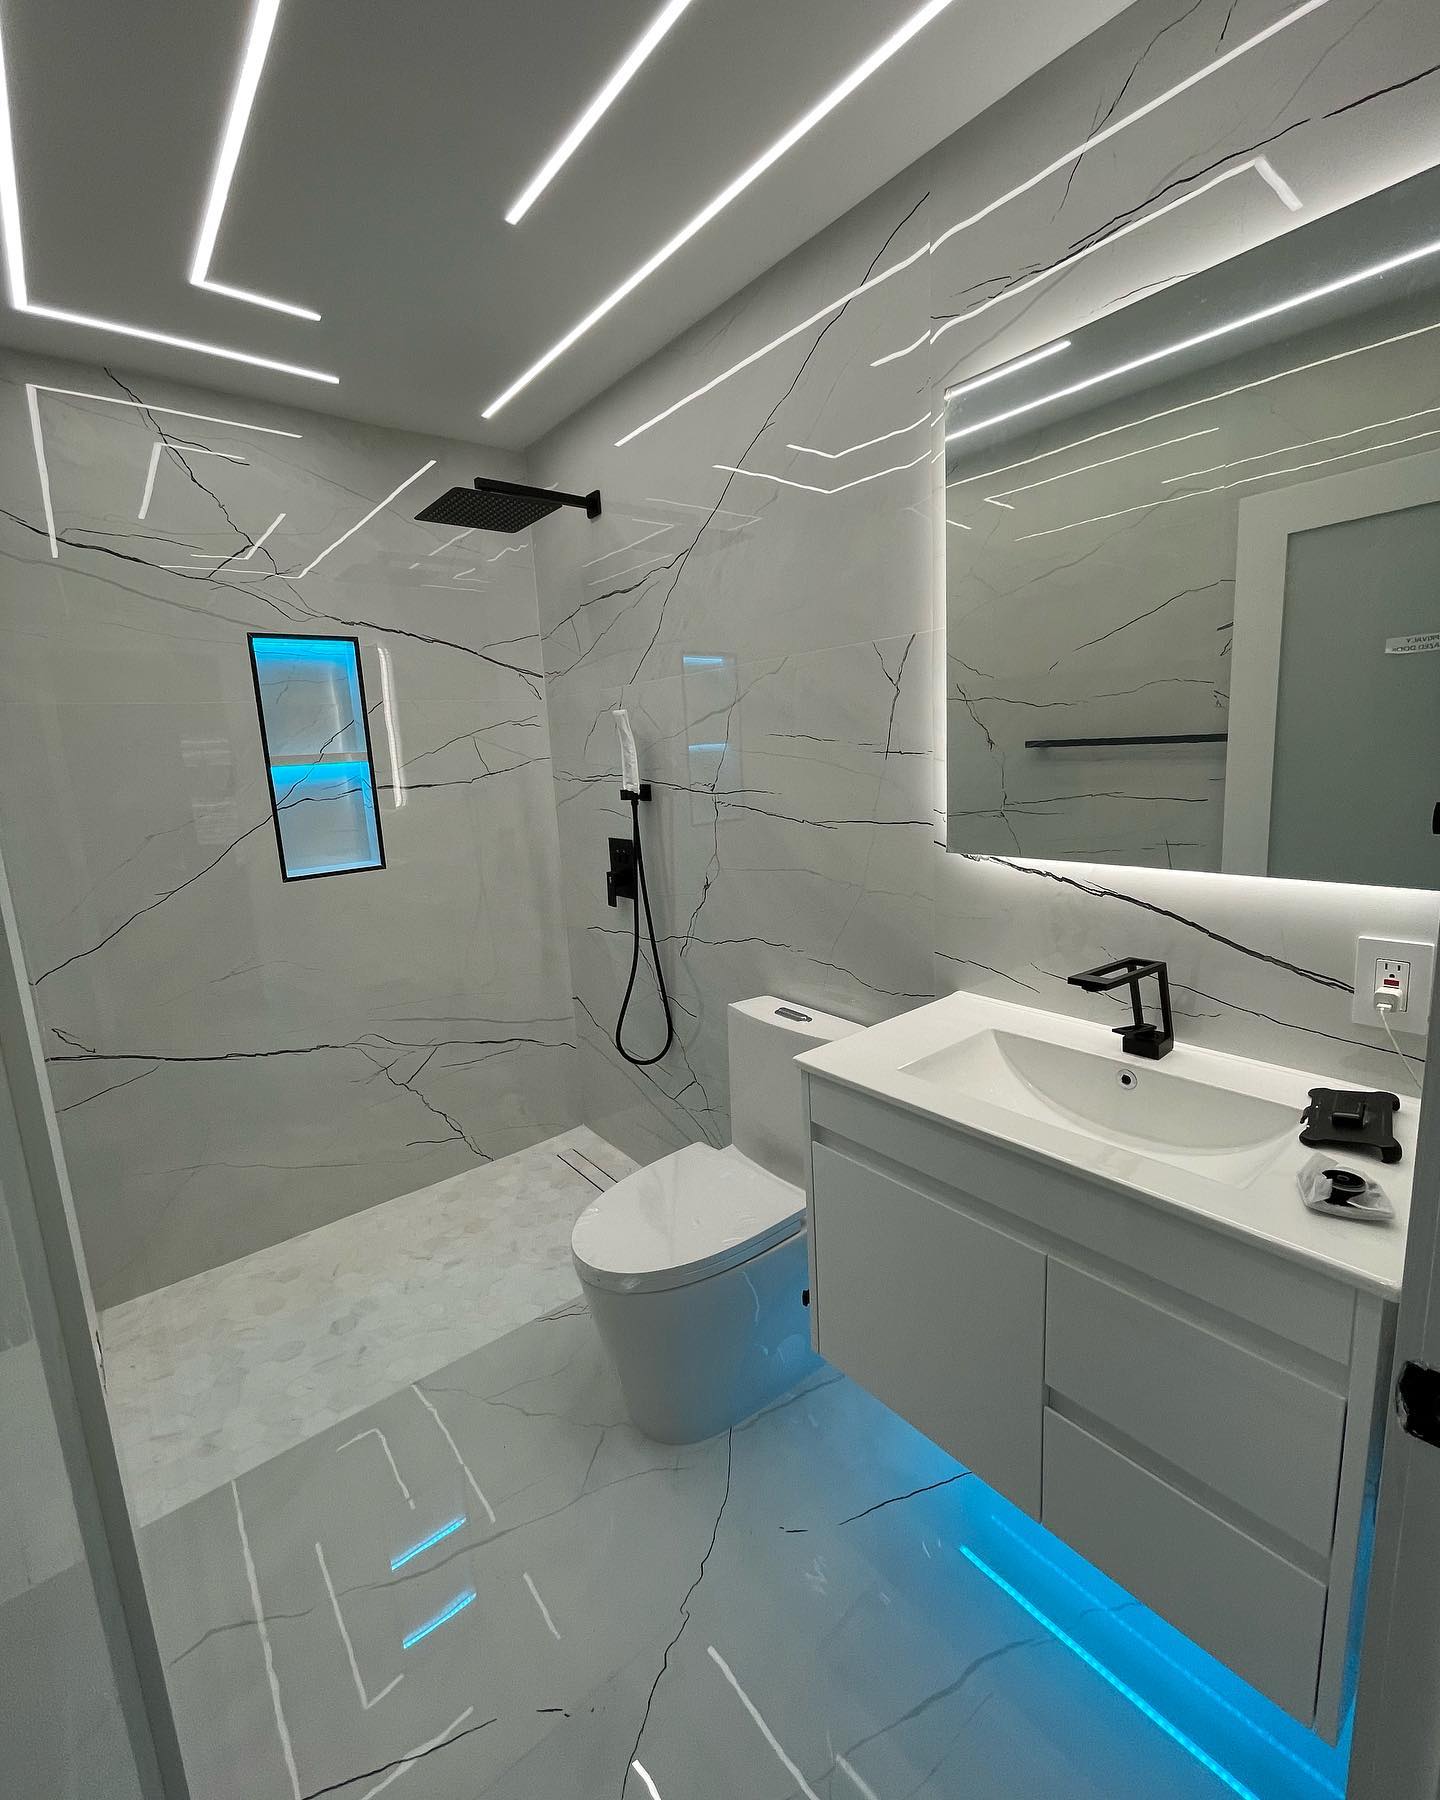 Shower Remodel 8 - Transform Your Bathroom with a Shower Remodel: 10 Design Trends to Consider